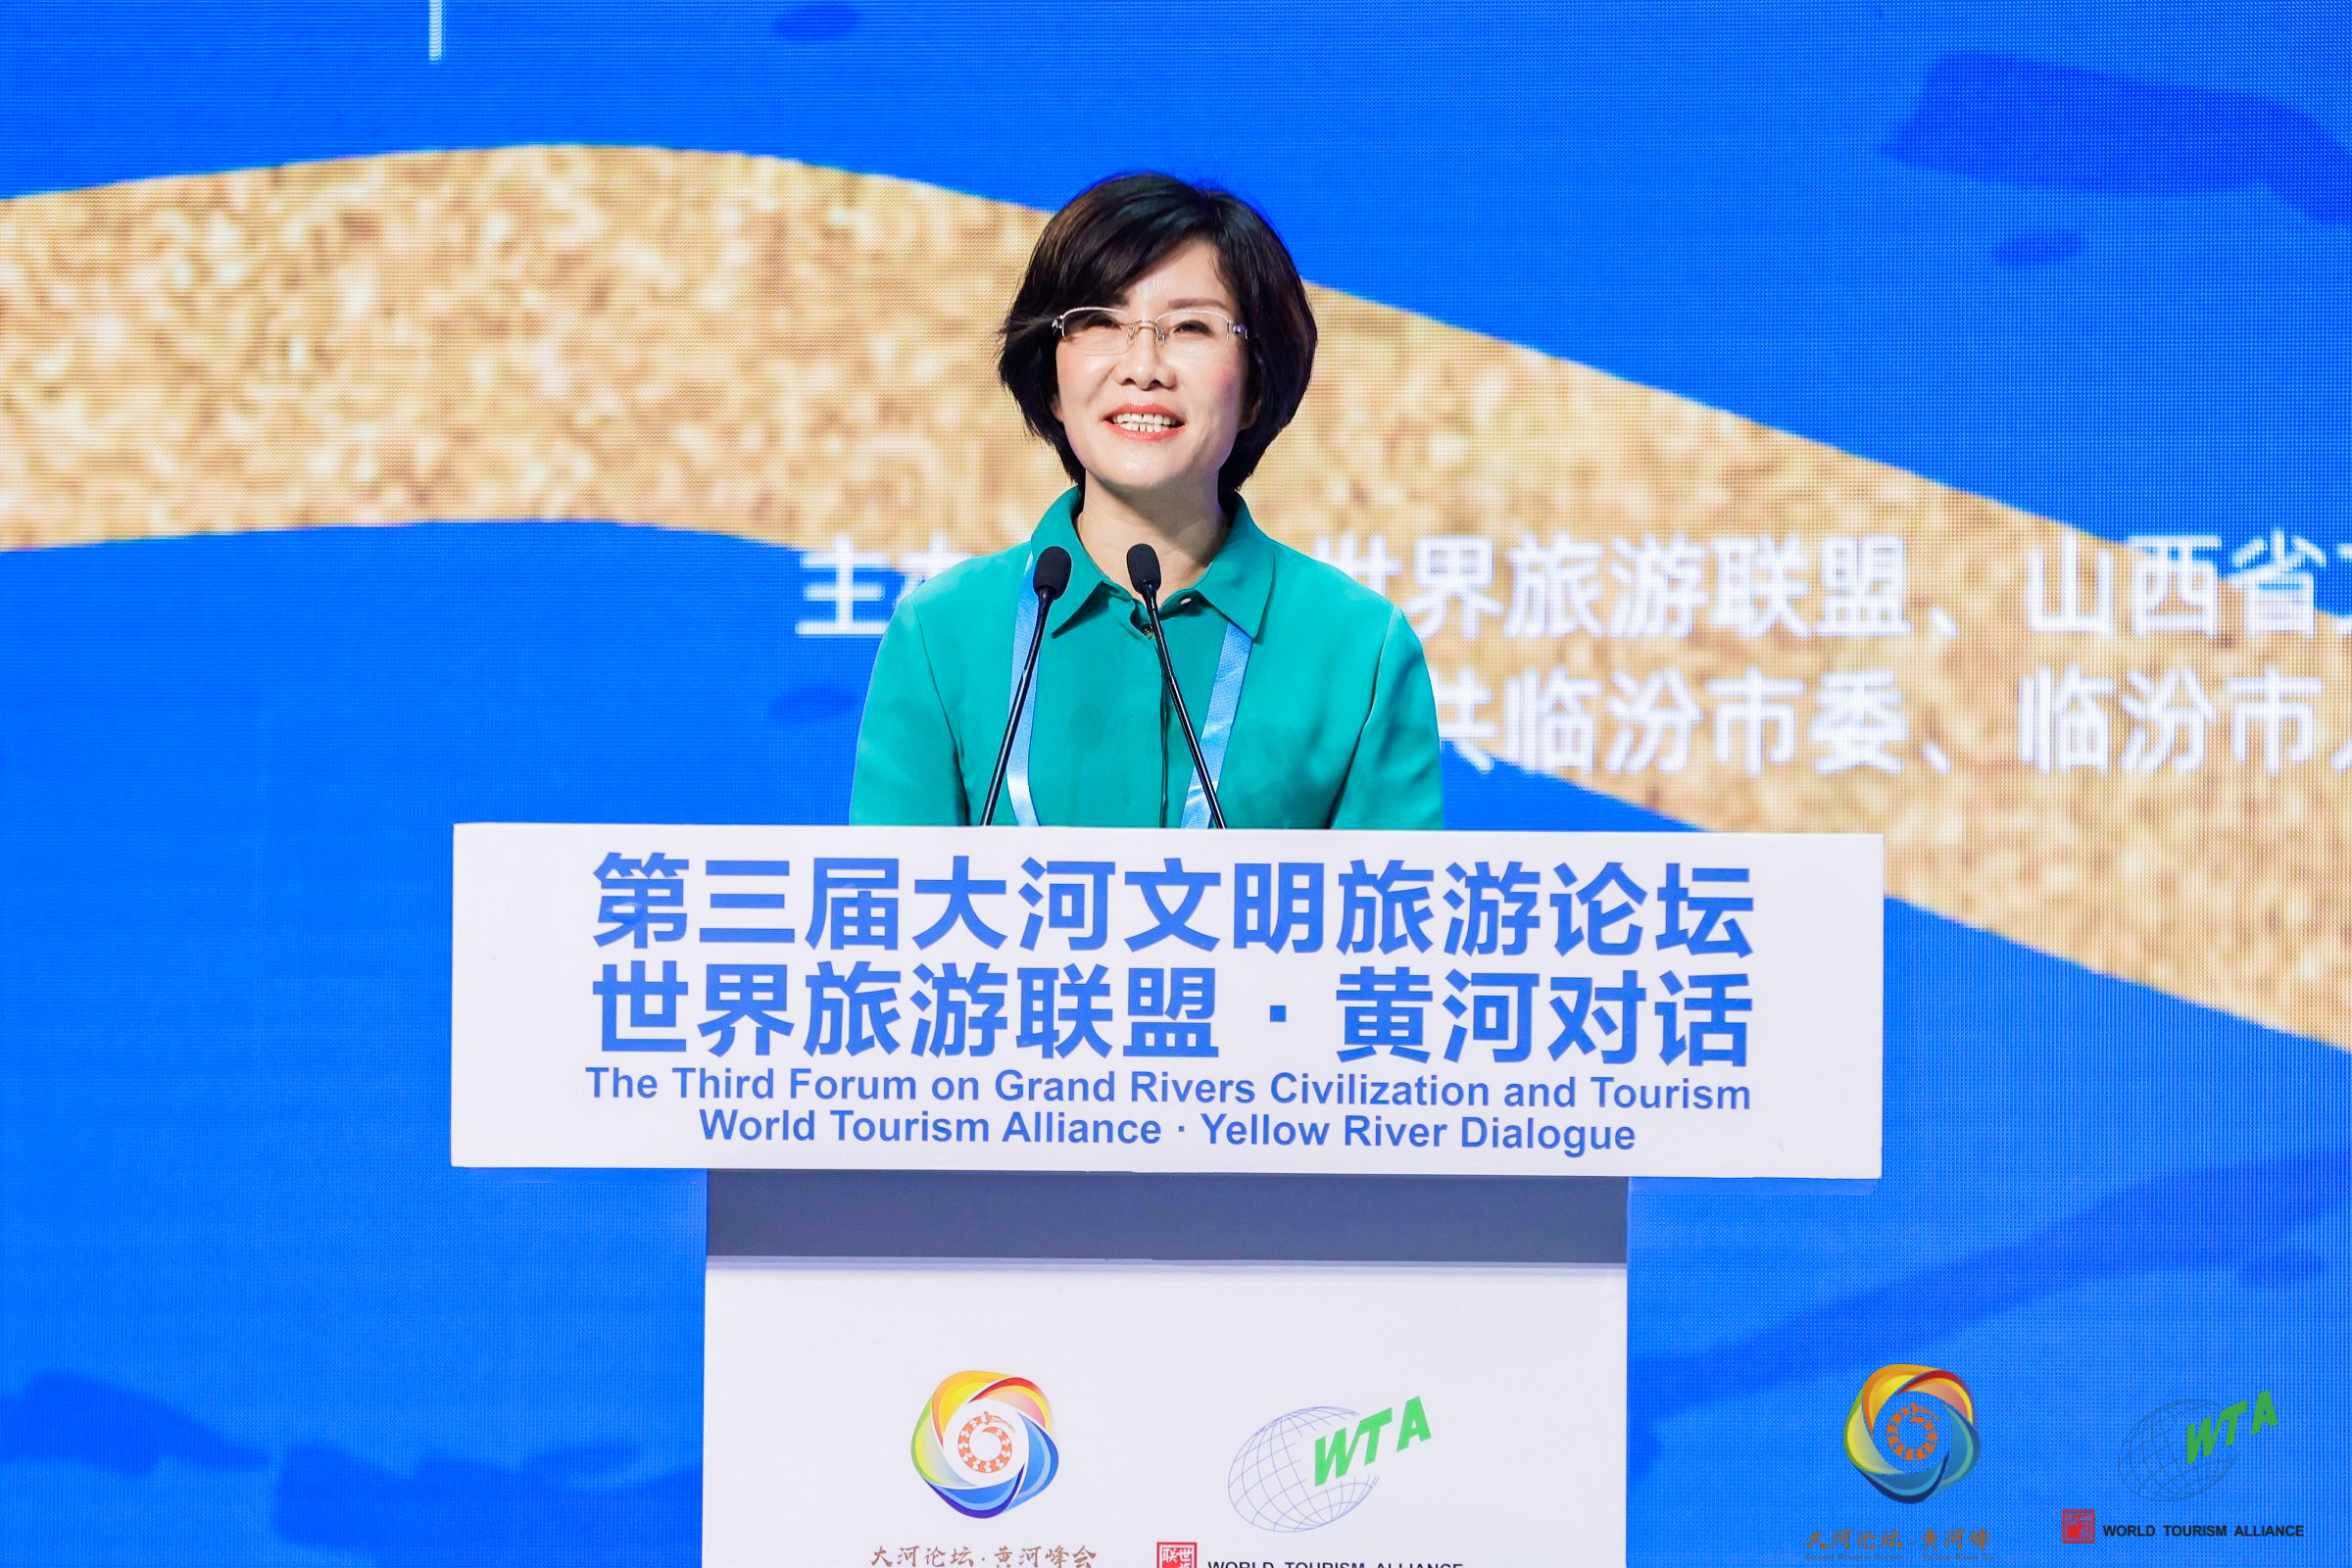 Wang Aqin, Director-General of Shanxi Provincial Department of Culture and Tourism